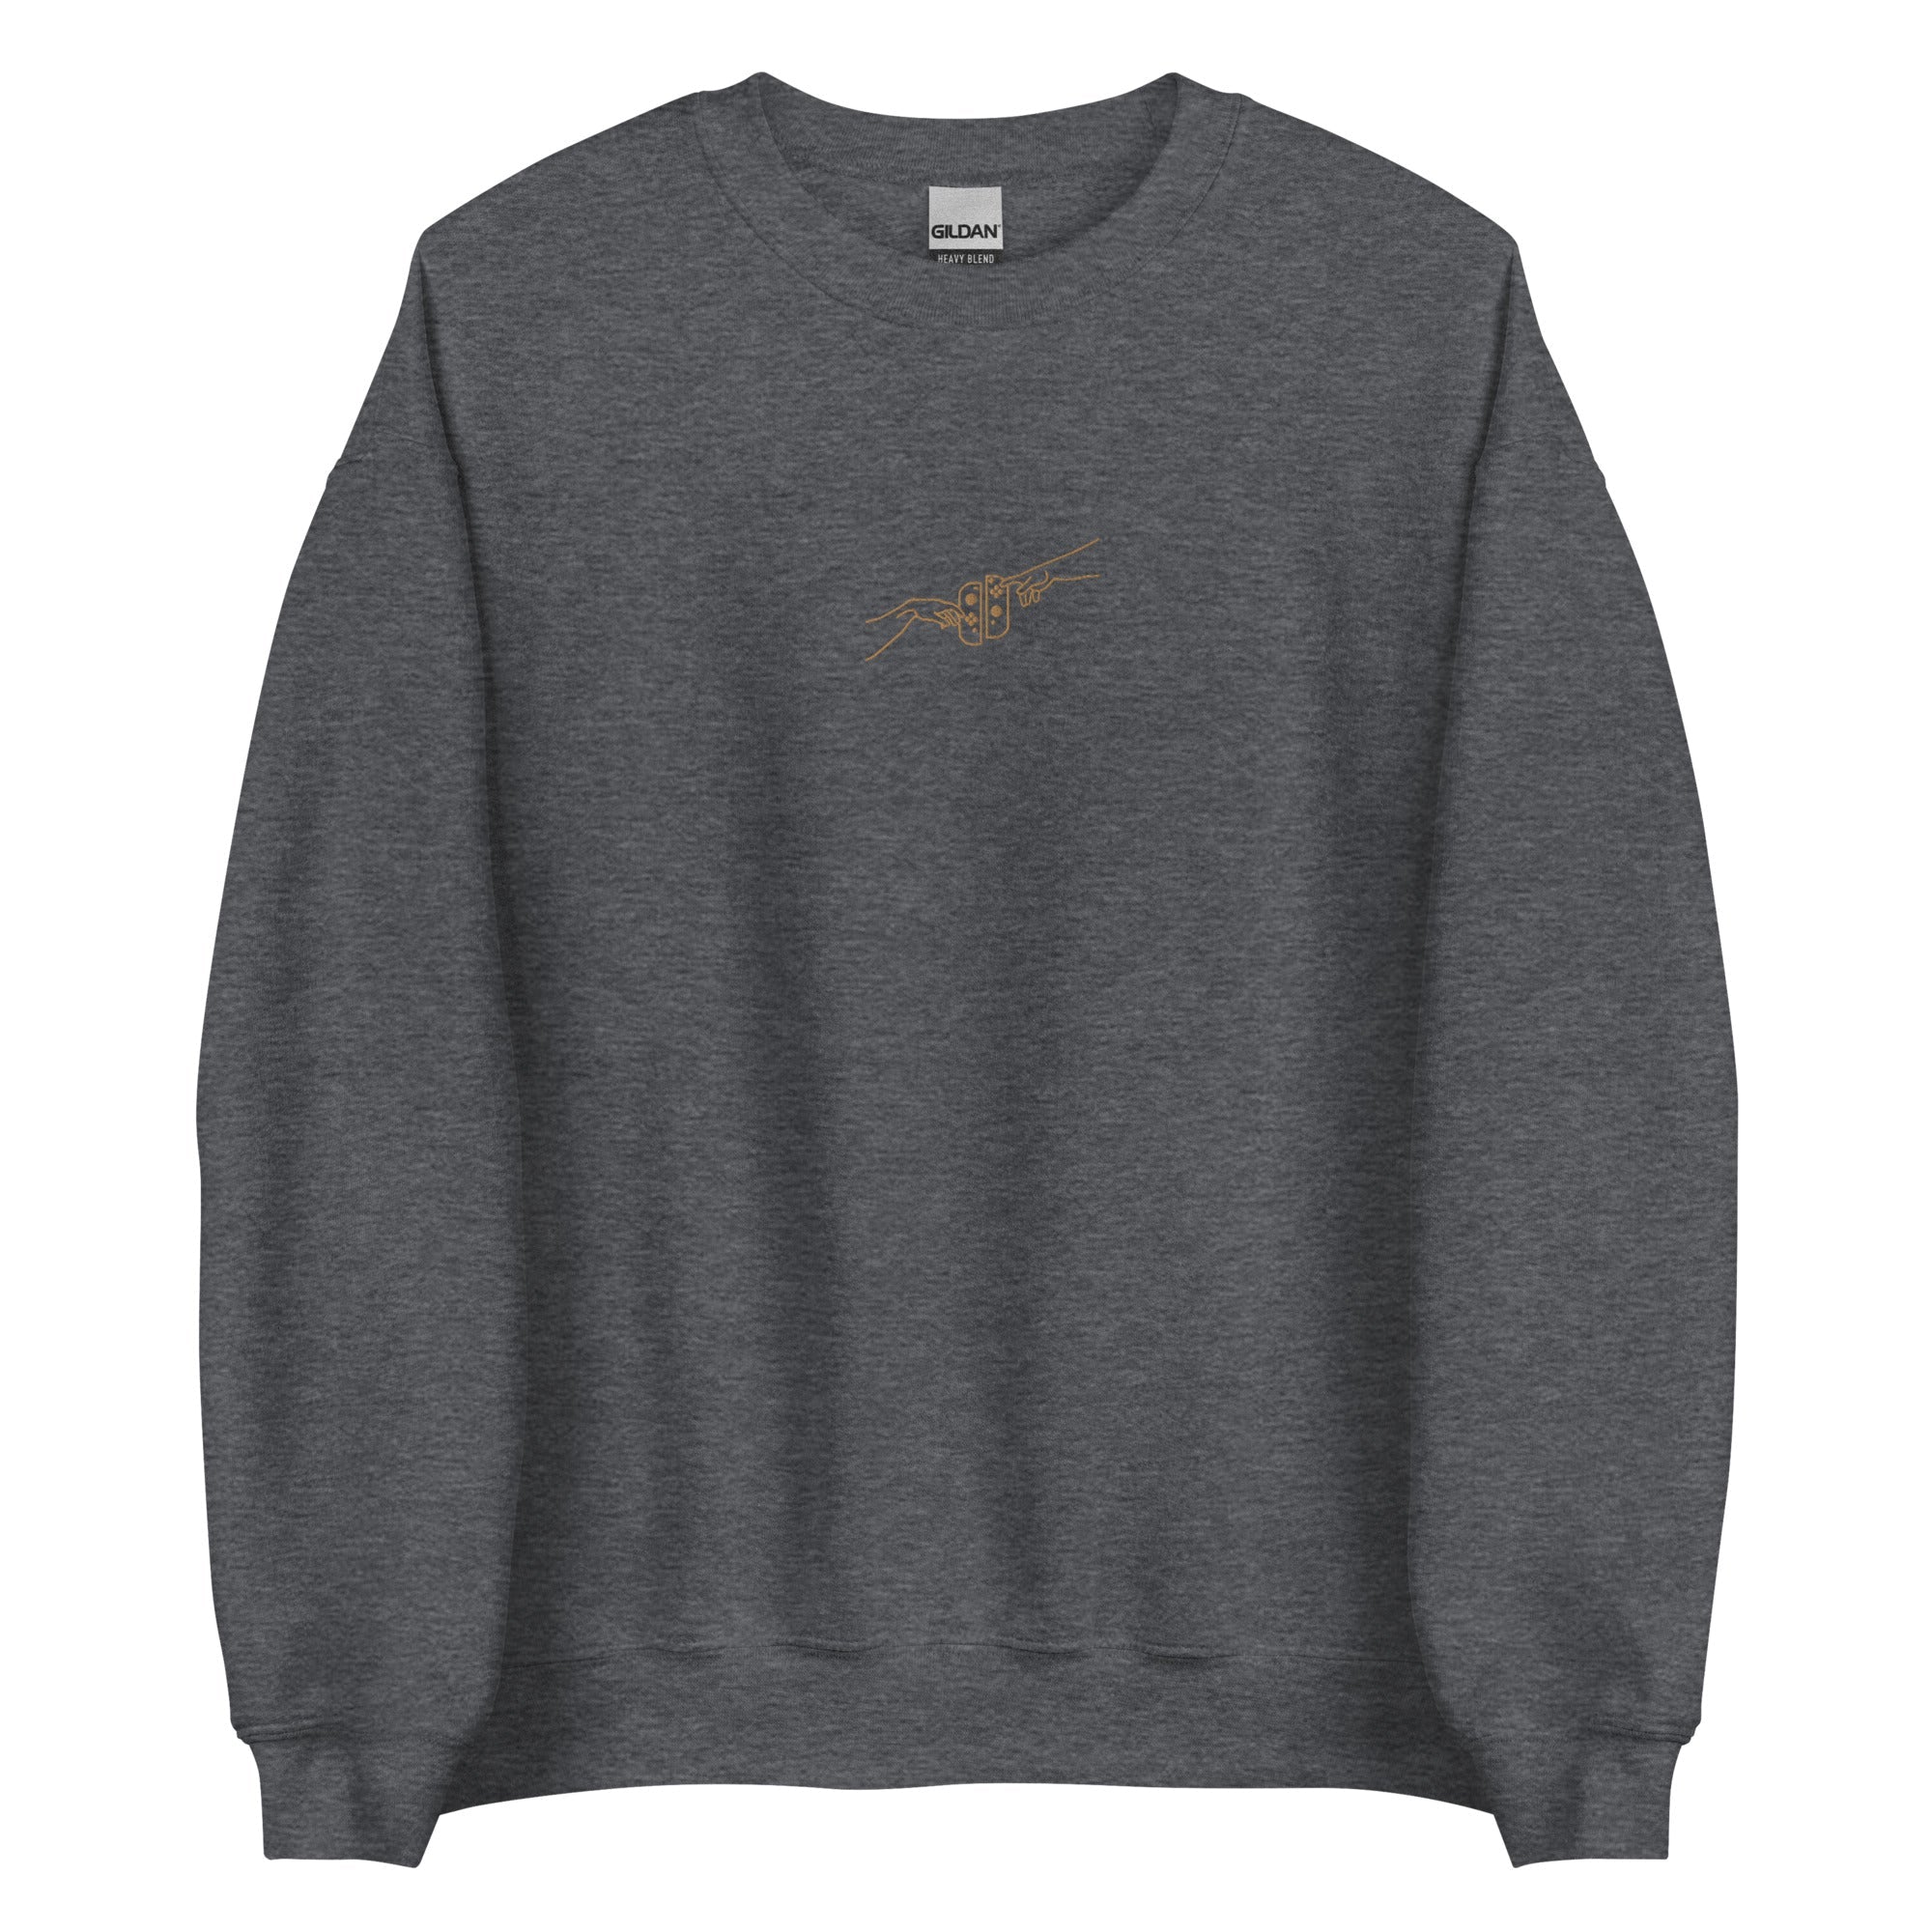 The Creation of Switch | Embroidered Unisex Sweatshirt | Cozy Gamer Threads and Thistles Inventory Dark Heather S 